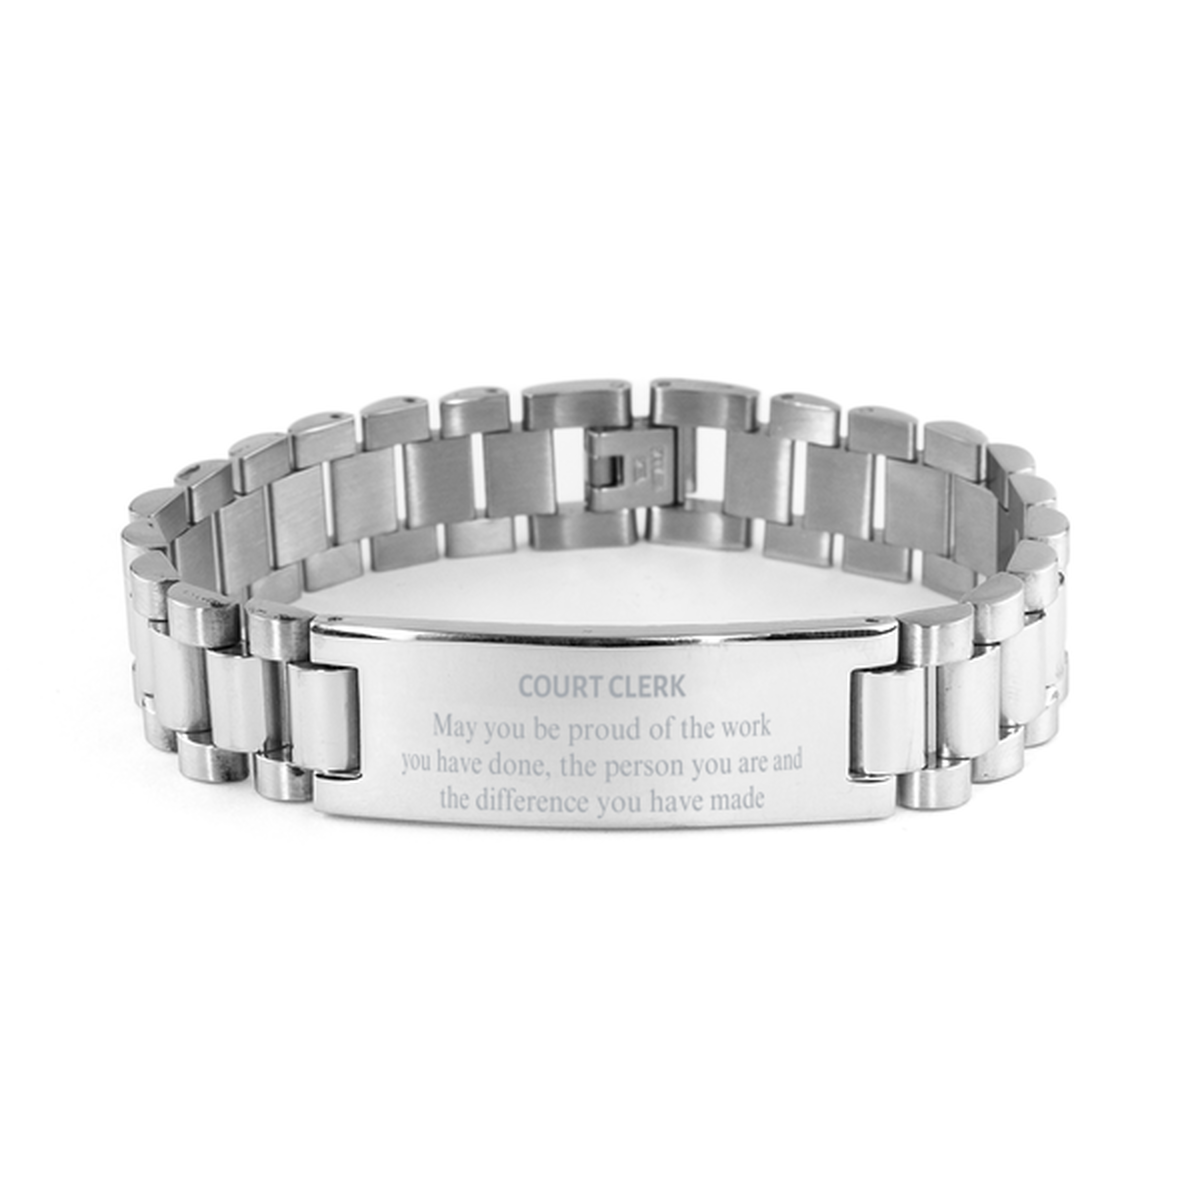 Court Clerk May you be proud of the work you have done, Retirement Court Clerk Ladder Stainless Steel Bracelet for Colleague Appreciation Gifts Amazing for Court Clerk